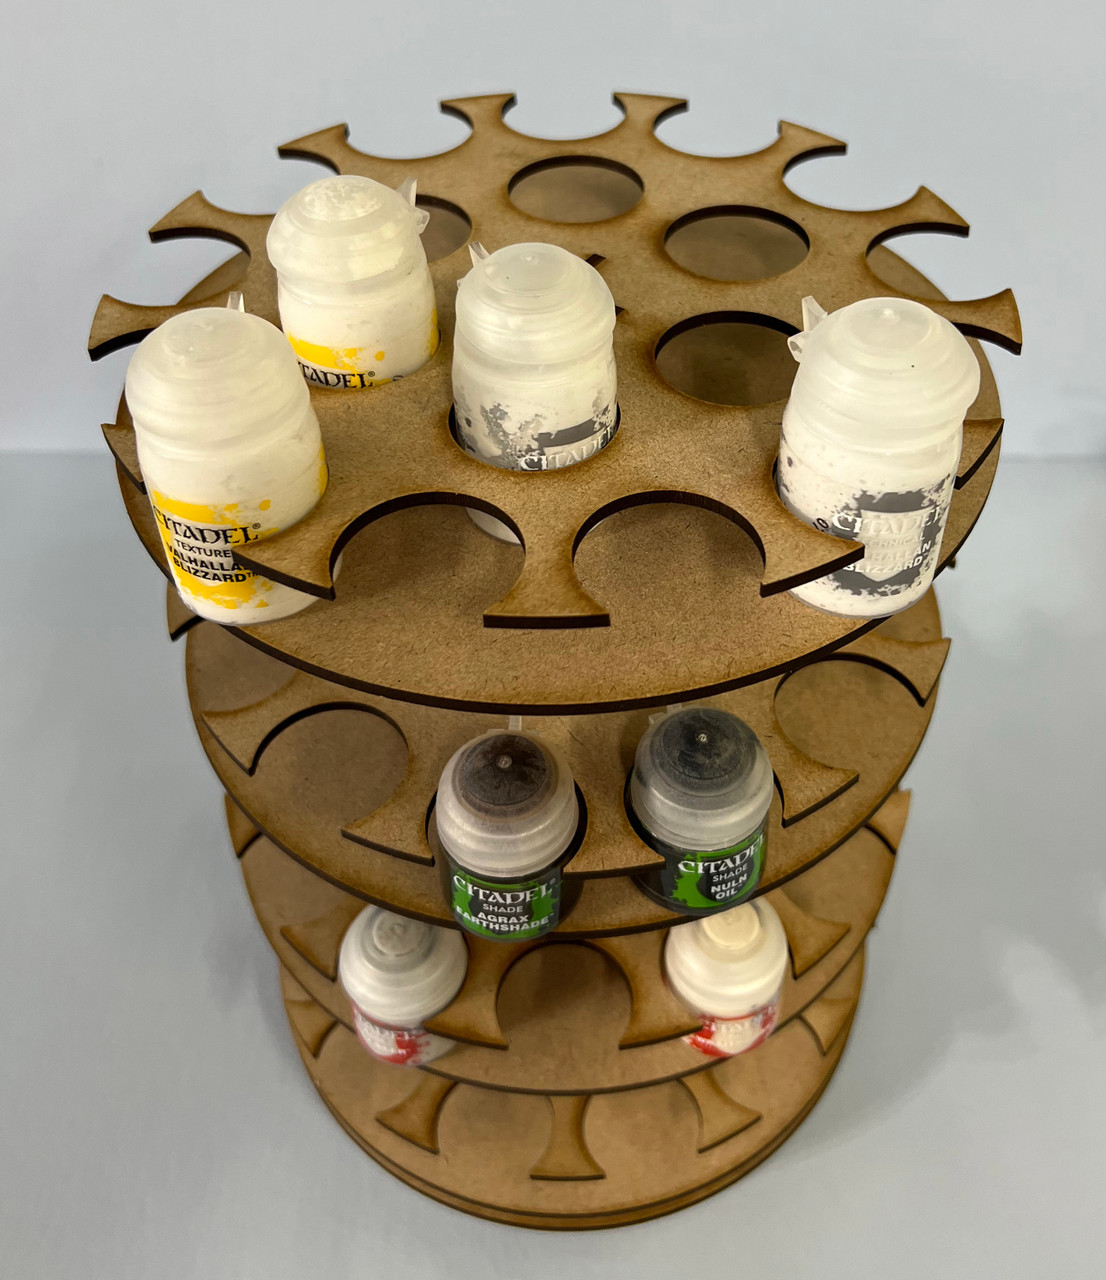 Paint rack - 36 mm (small) - The GiftForge International